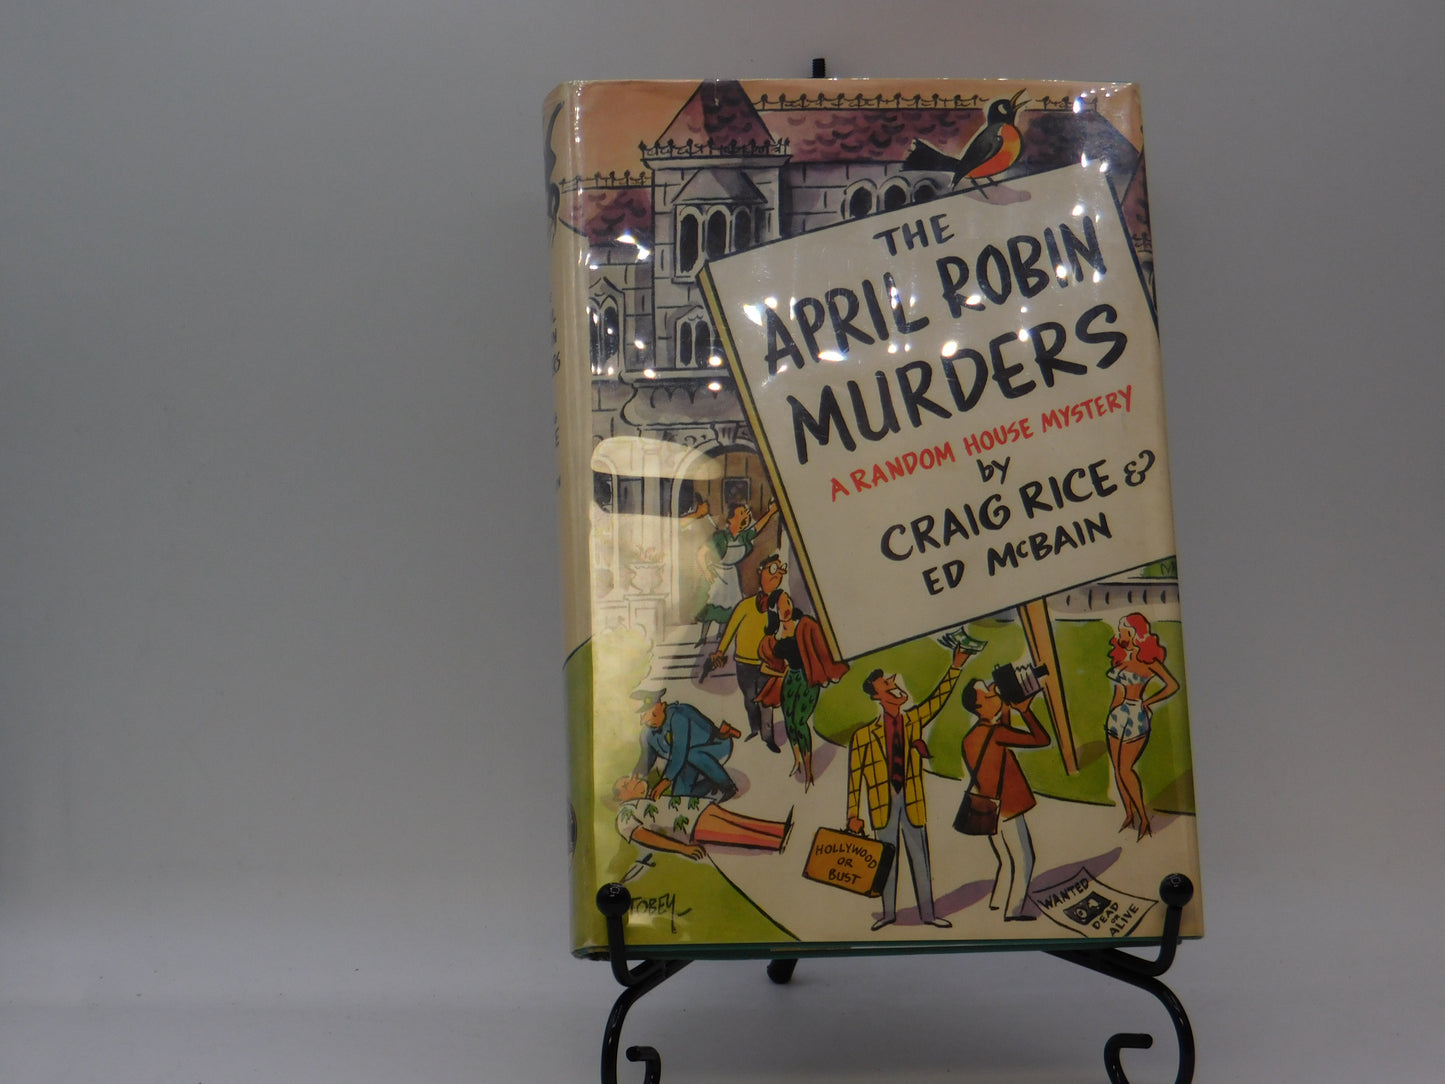 The April Robin Murders by Craig Rice